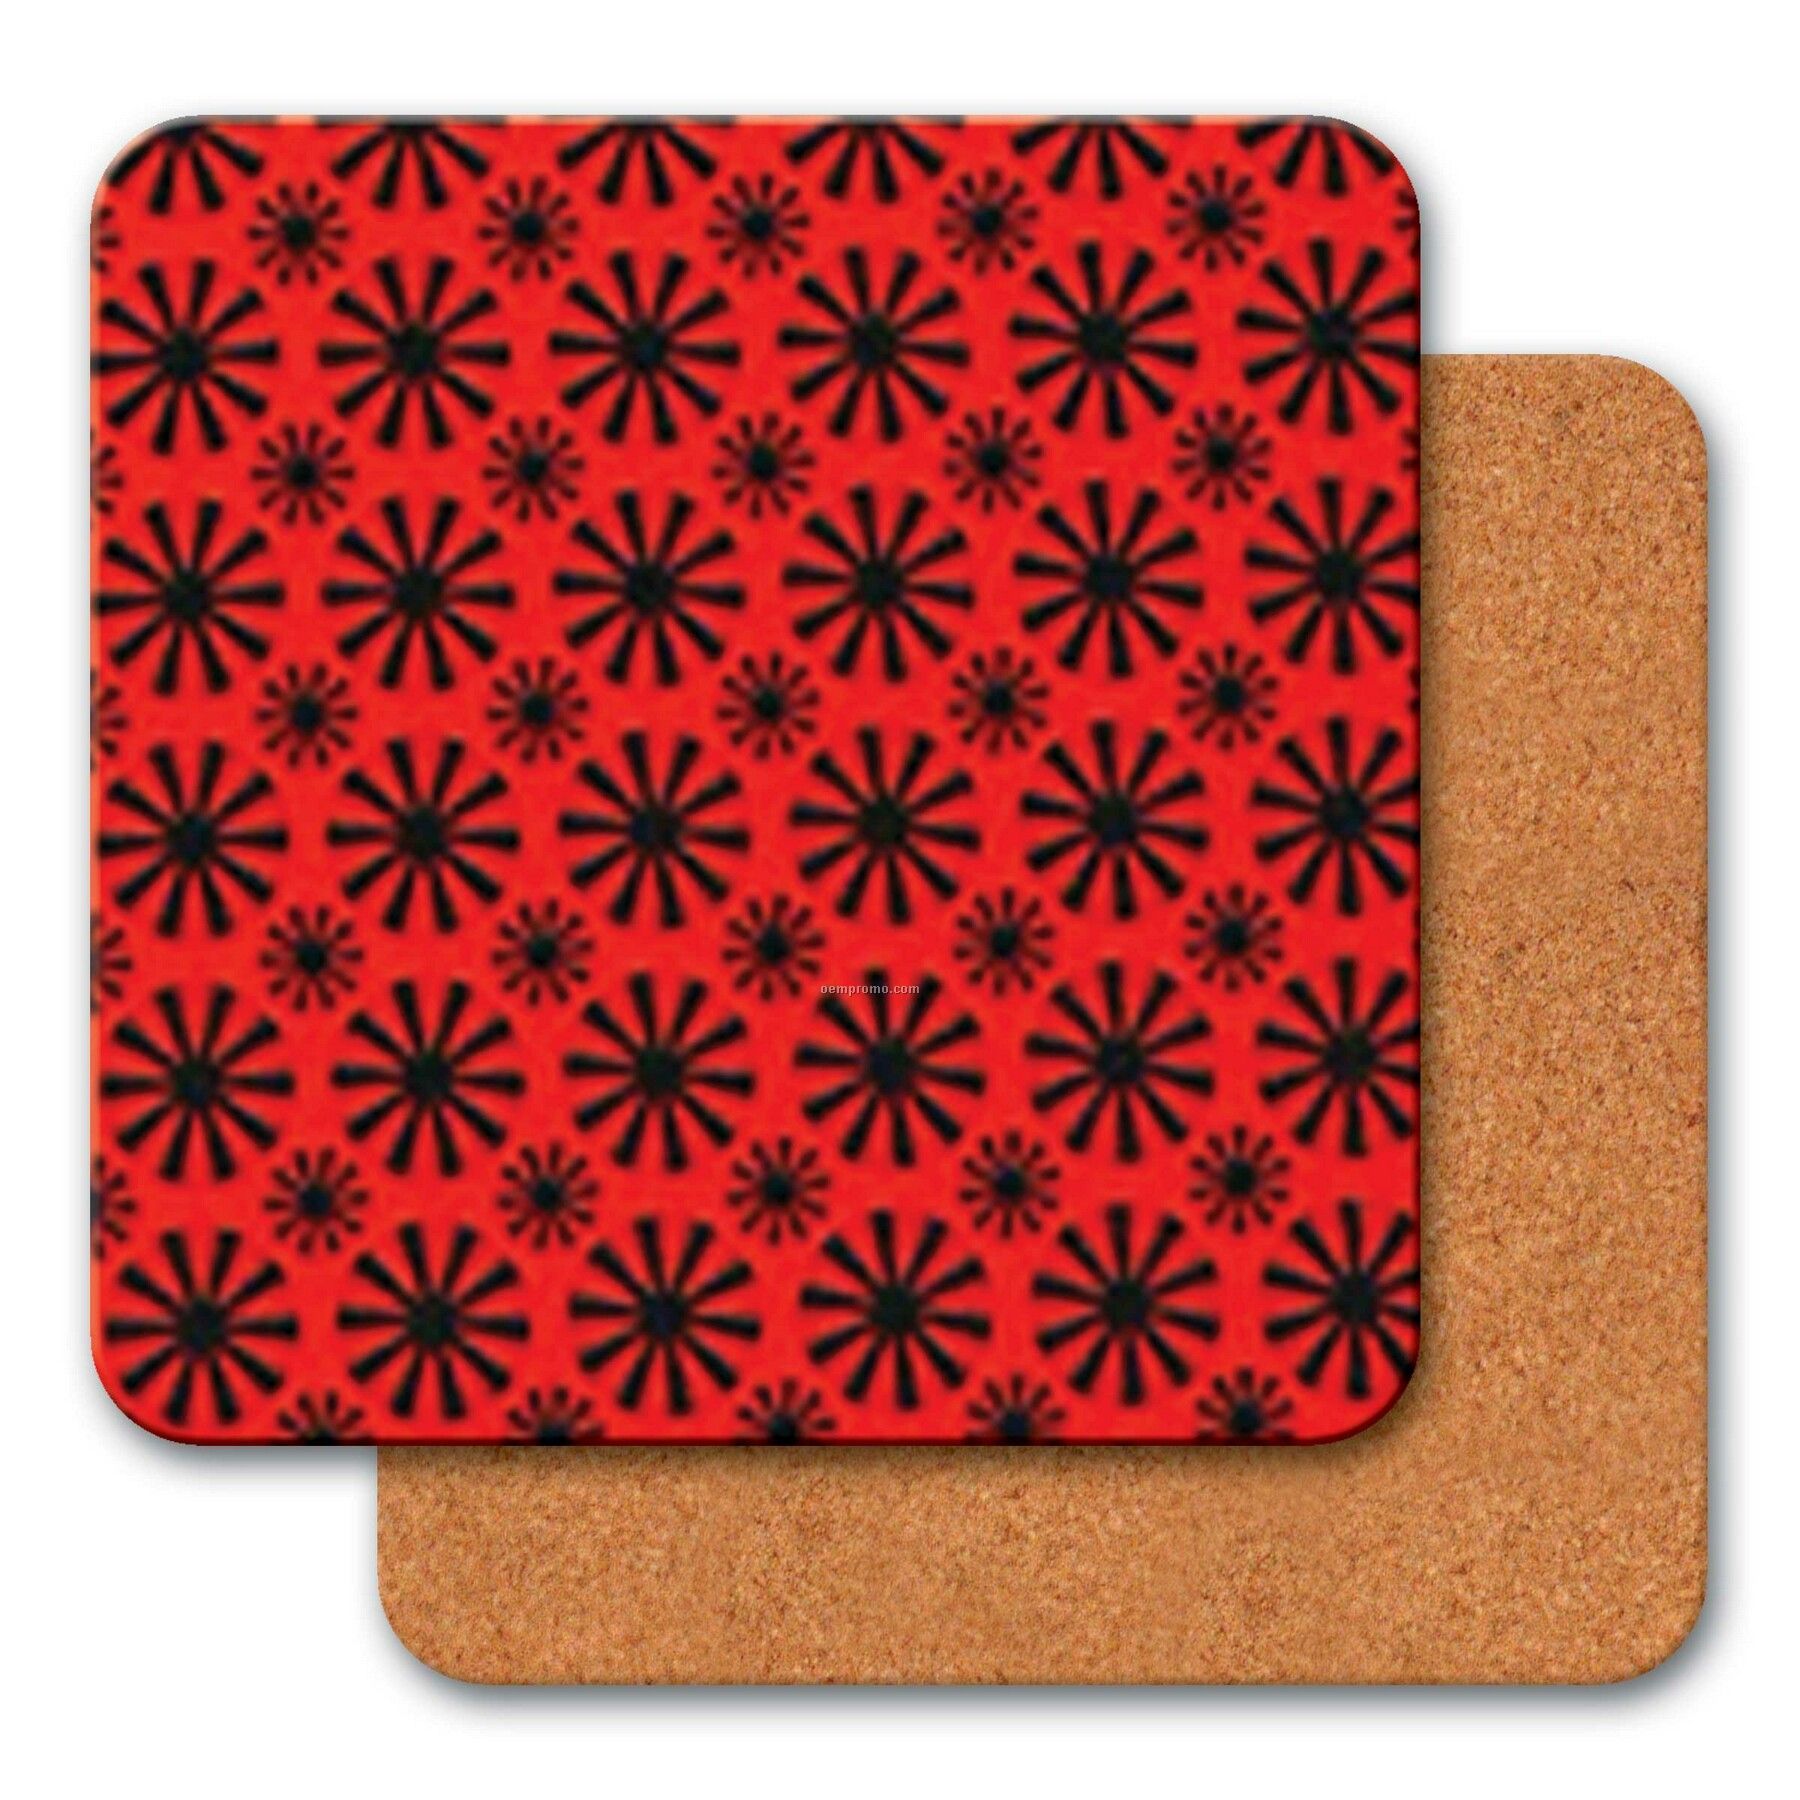 4" Square Coaster W/3d Lenticular Animated Spinning Wheels (Blanks)